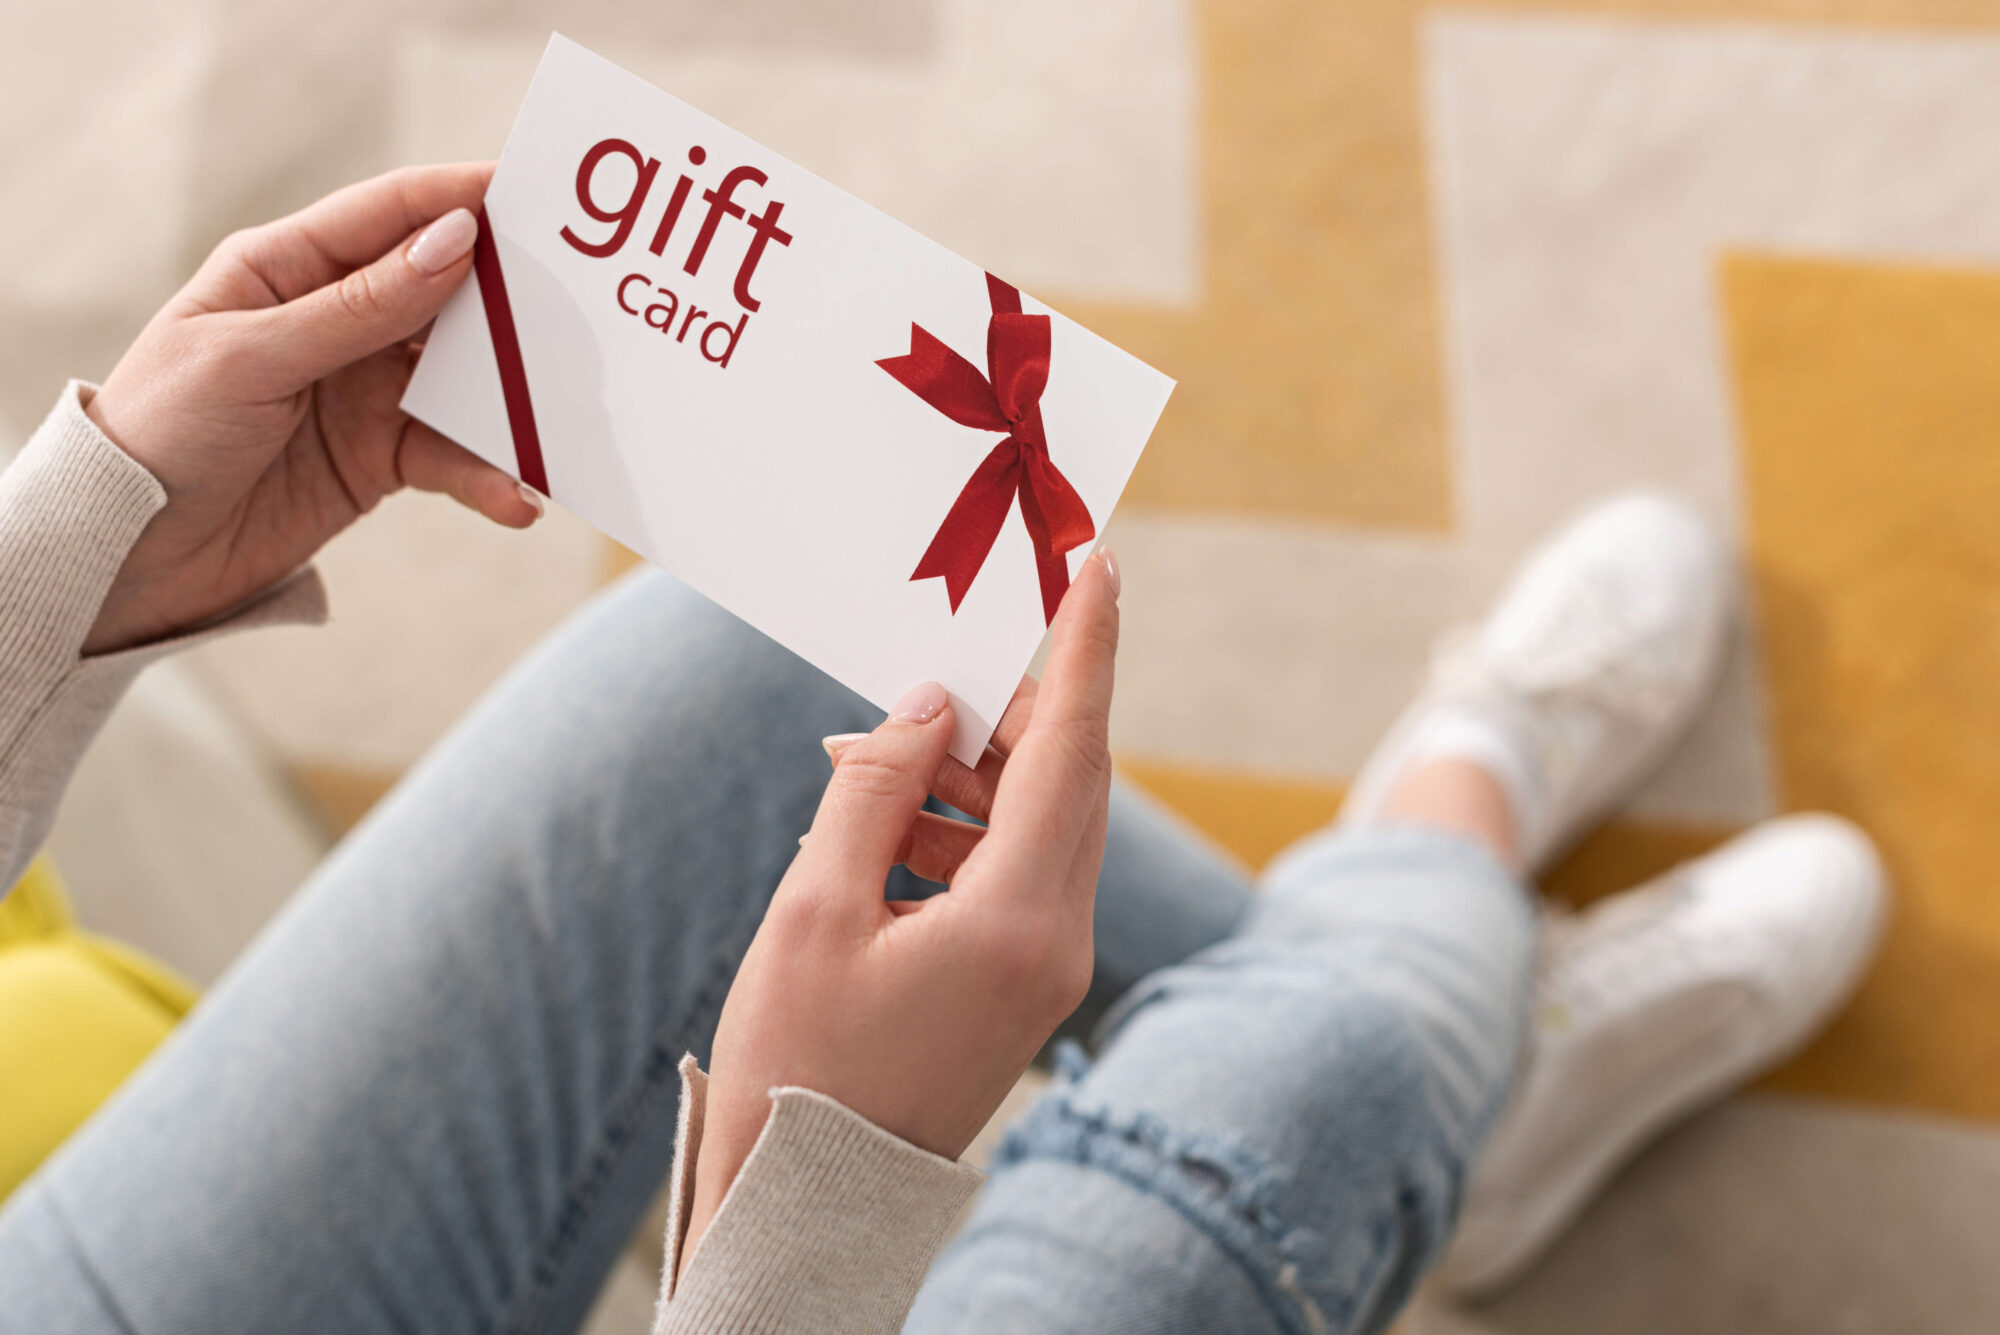 1cropped-view-of-girl-holding-gift-card-with-red-bo-2021-08-30-19-16-02-utc (1)